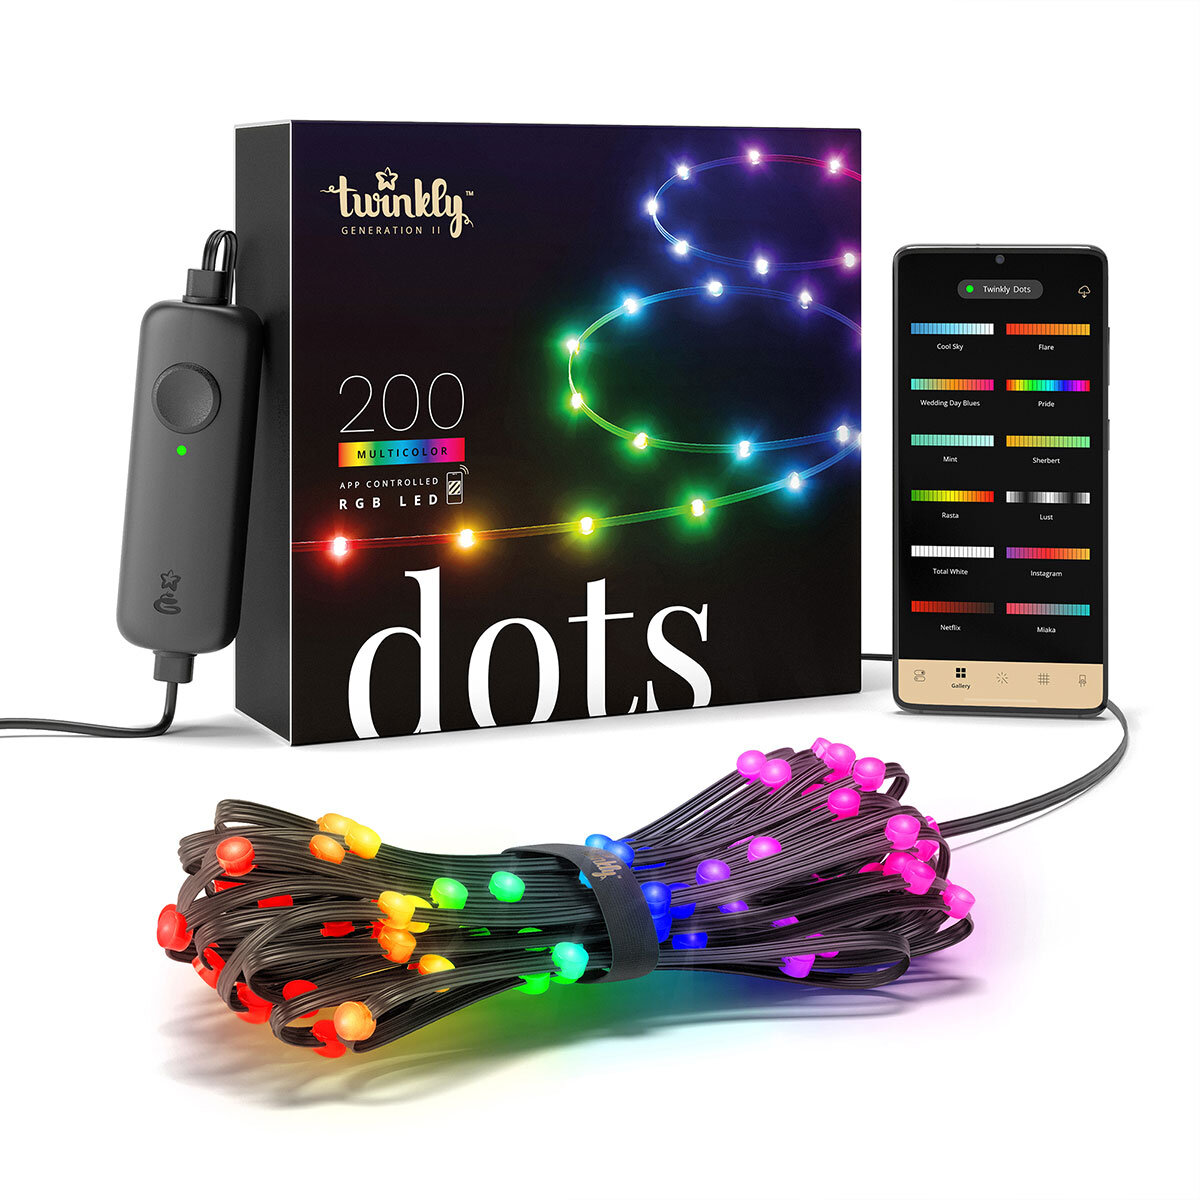 Buy Twinkly Dots 200 LED Lights Box & Item Image at Costco.co.uk